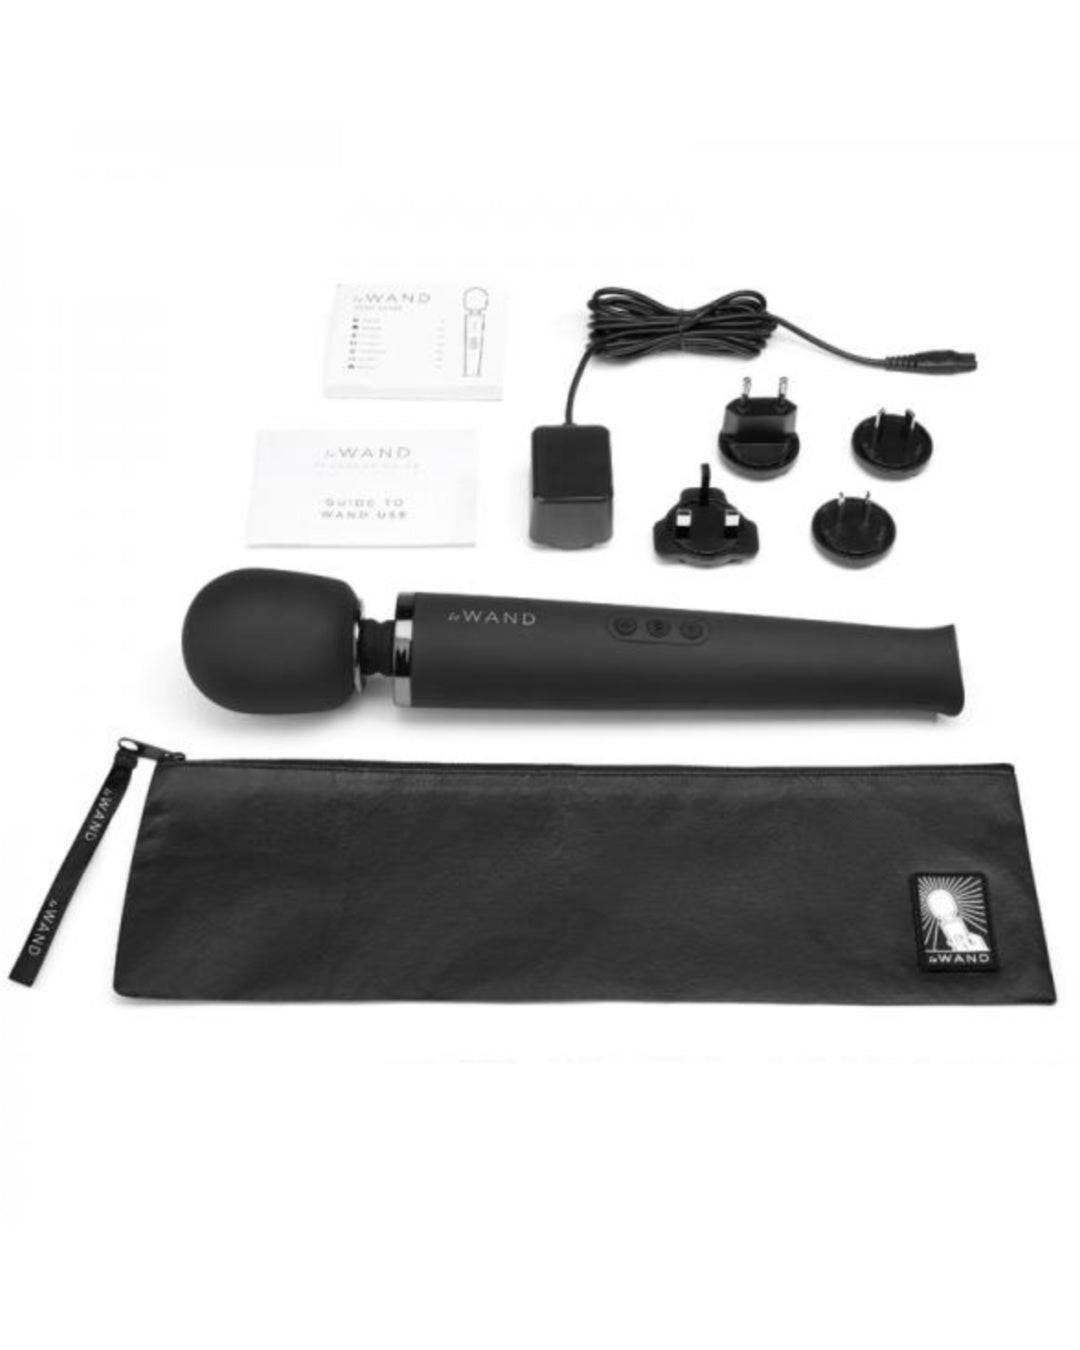 Le Wand Cordless Vibrating Massager - Black on a white background with the zip up travel bag, plugs, and cord